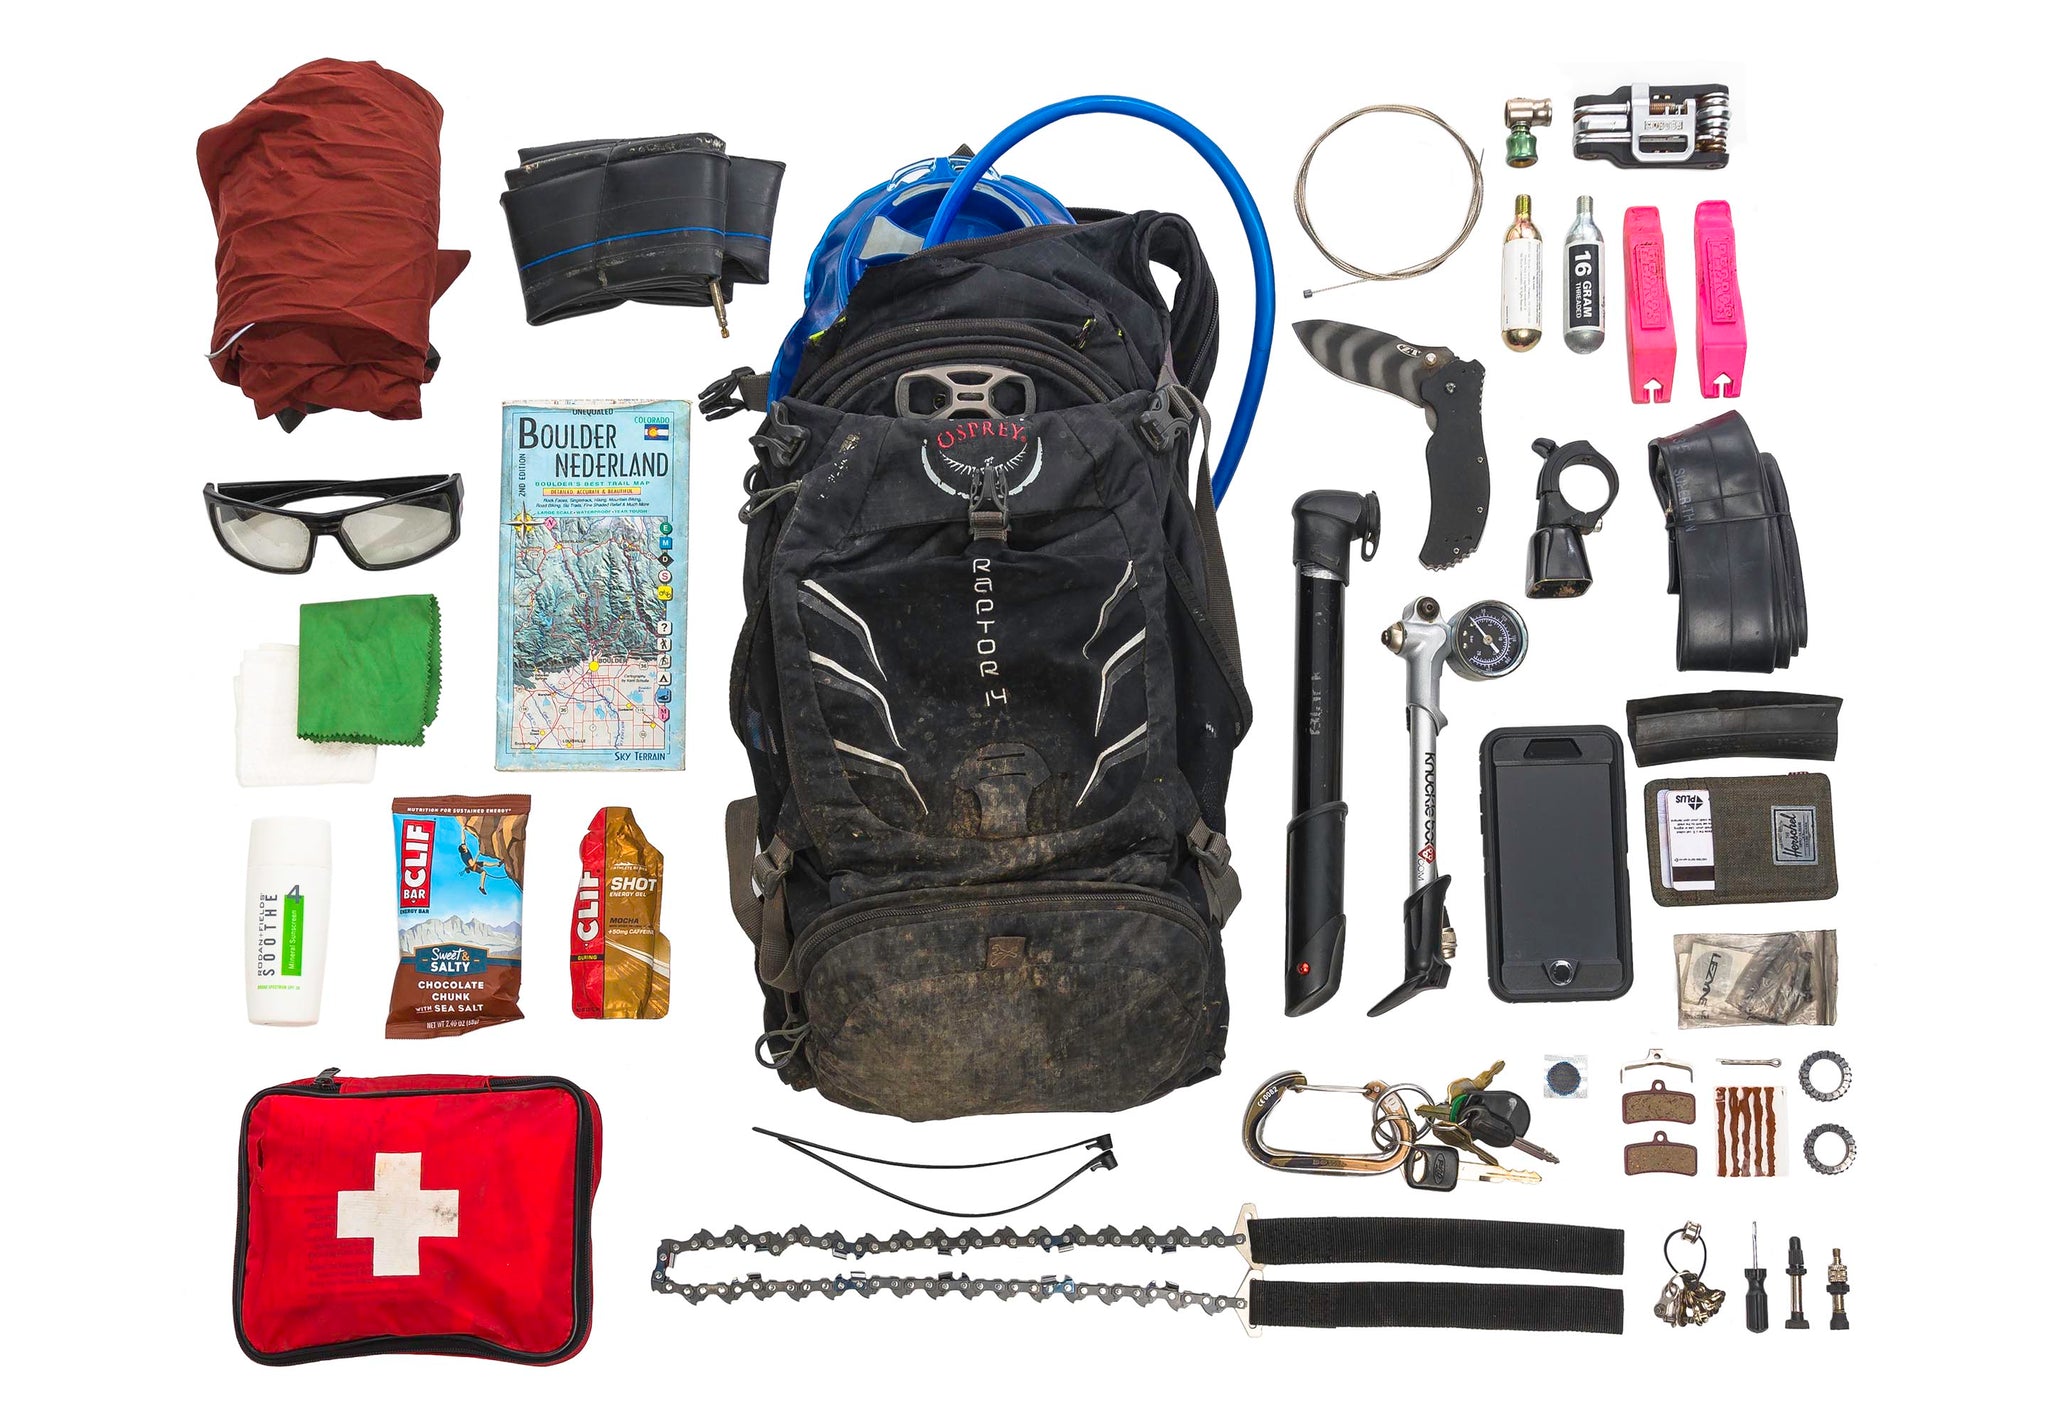 MTB Kit Bag Essentials: What to Bring on Your Mountain Bike Ride